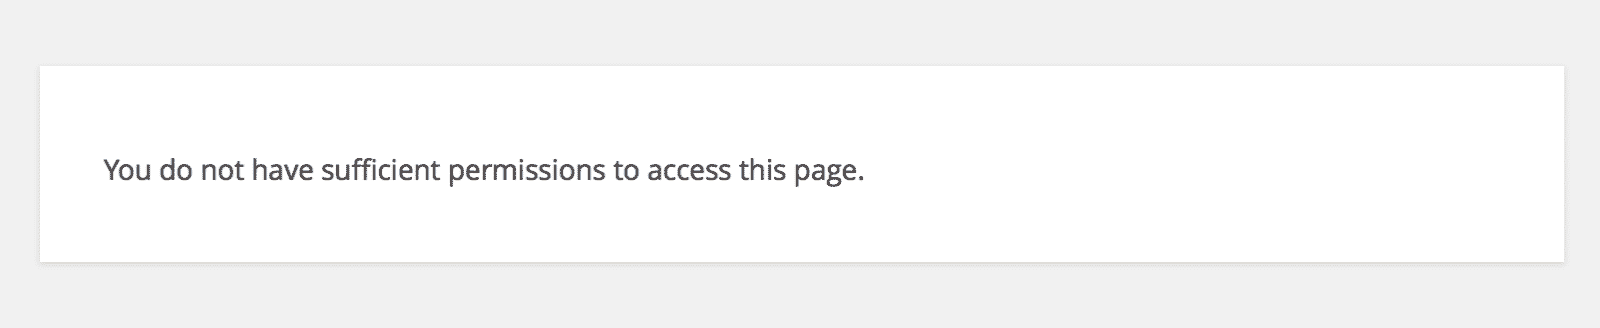 You do not have sufficient permissions to access this page.